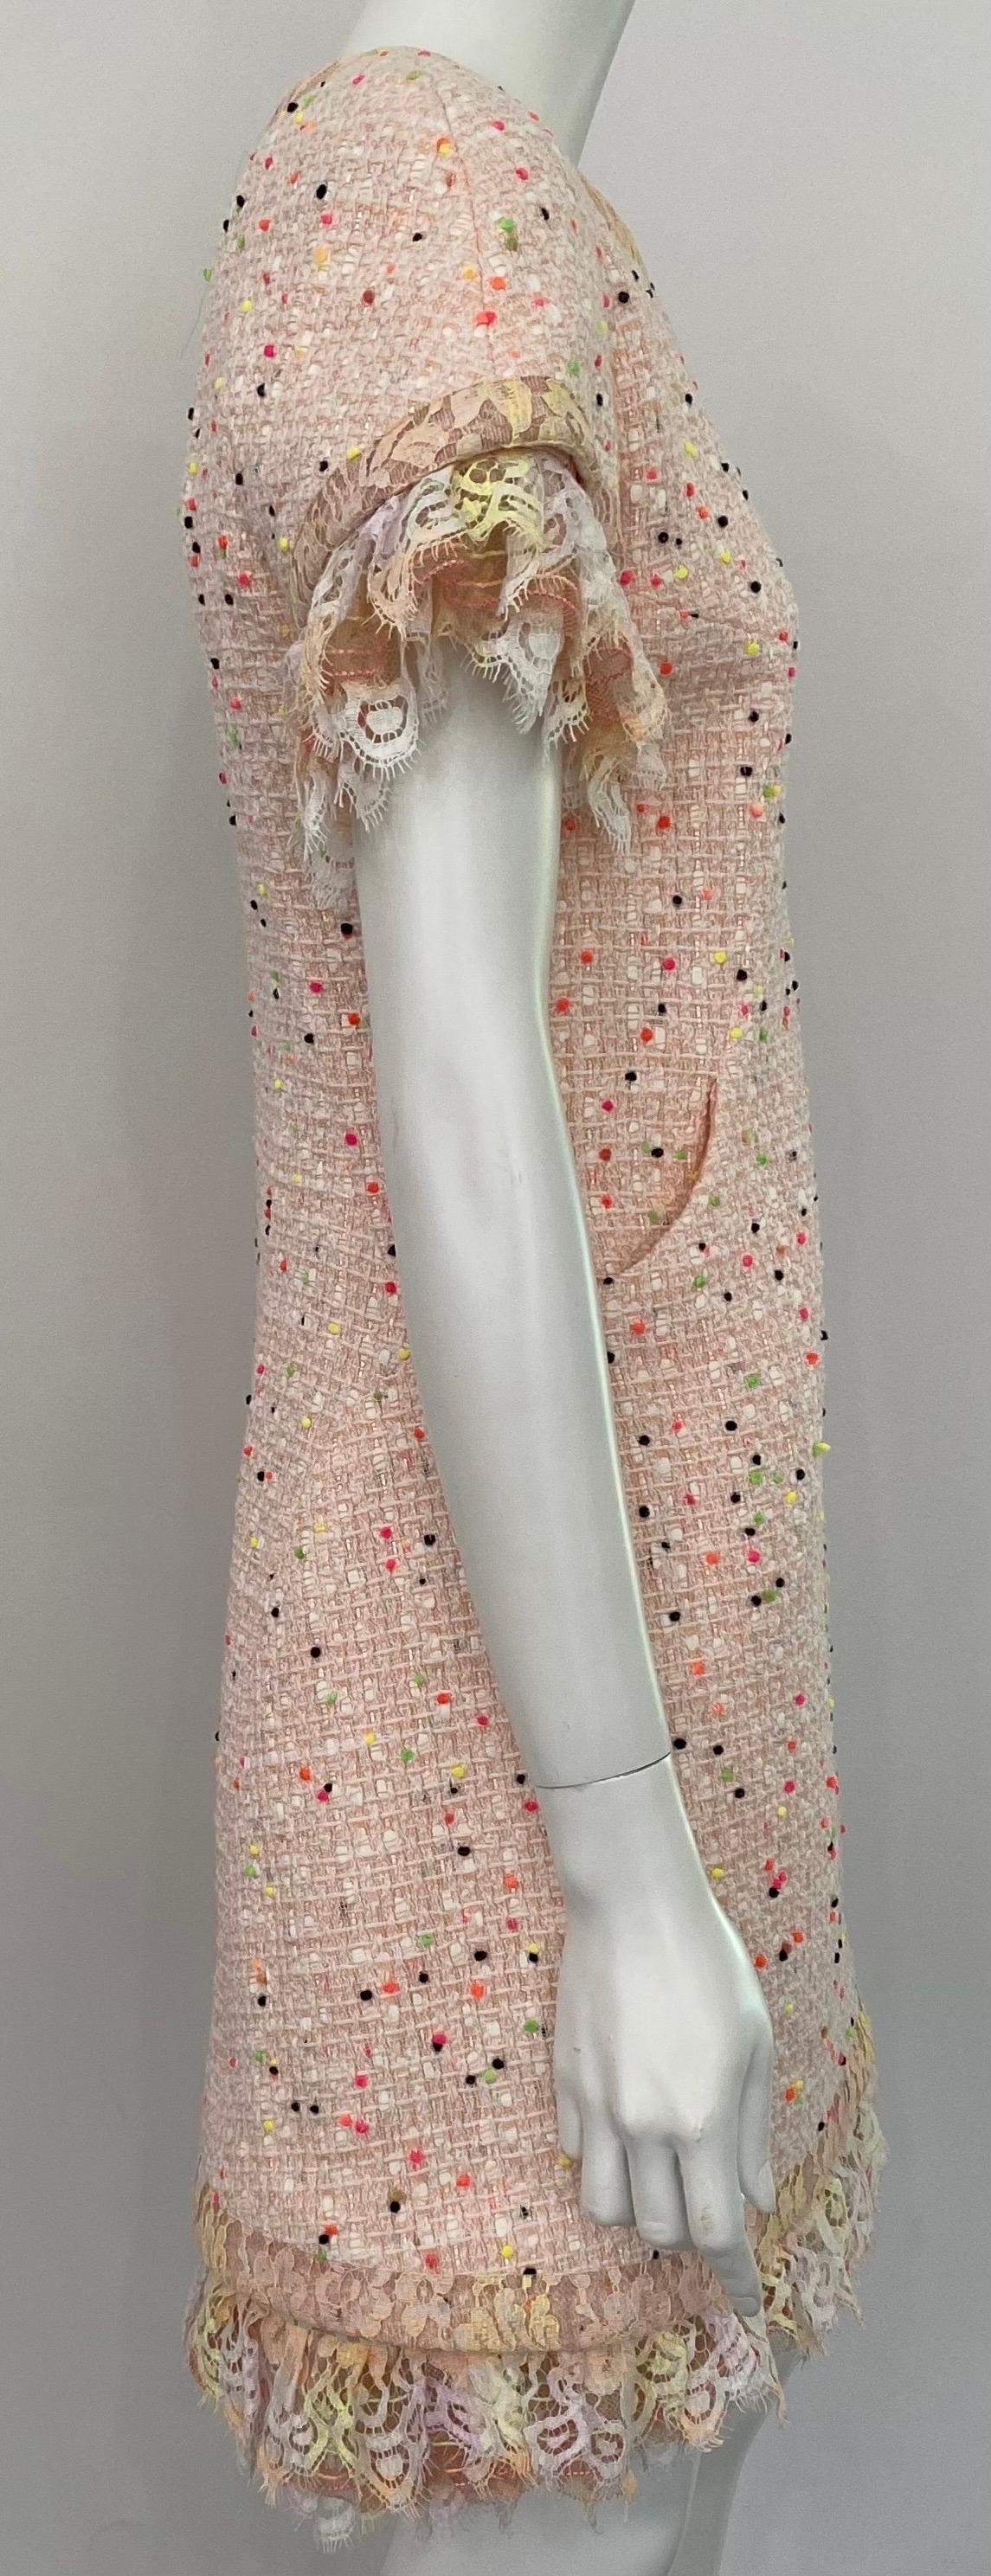 Chanel Peach and multi dot tweed Dress with removable lace detail - Sz 36 1